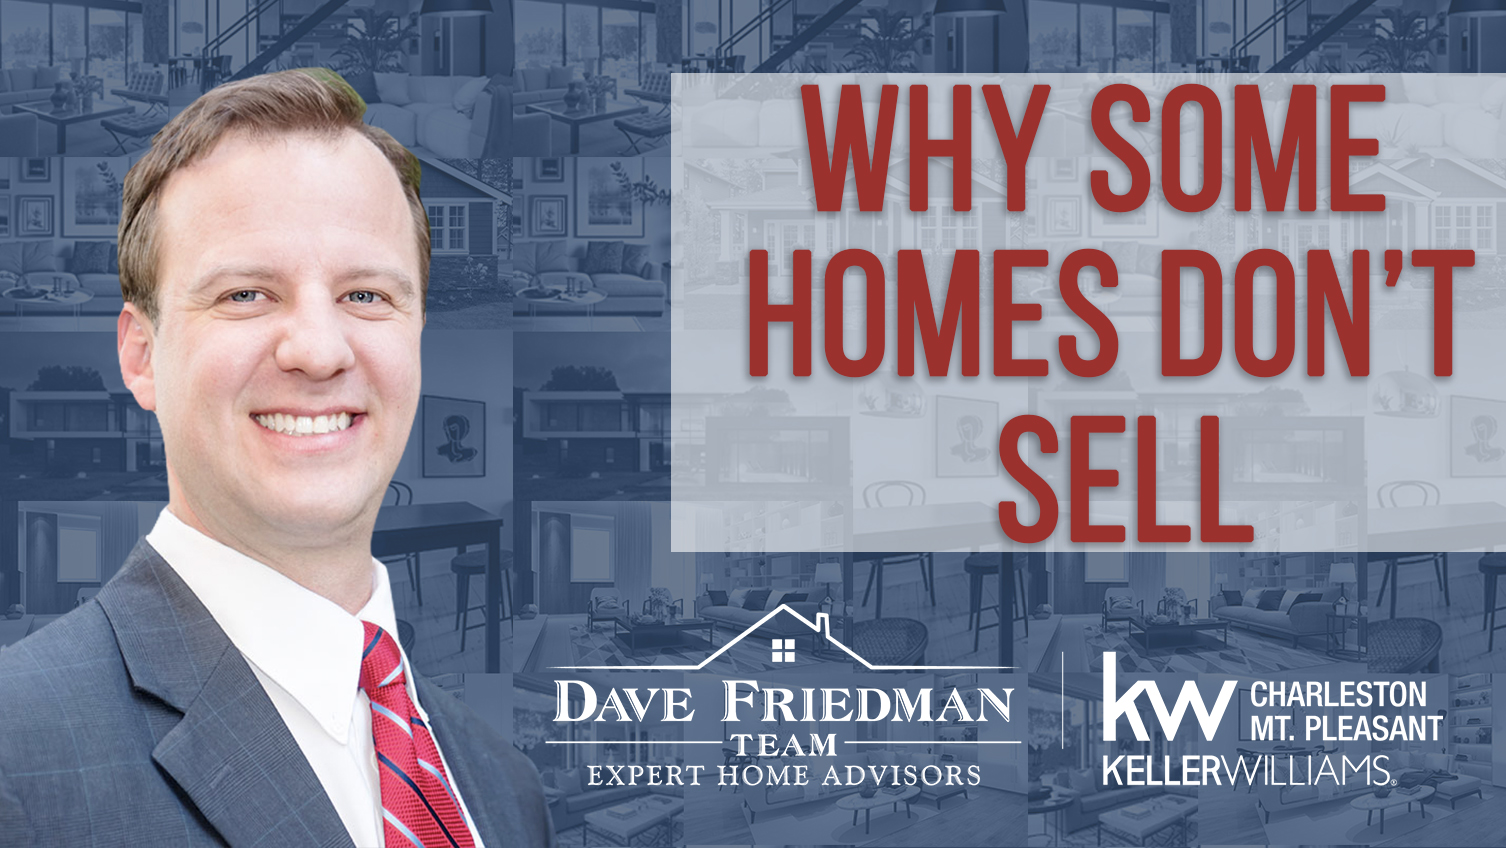 Don’t Keep Your Home From Selling